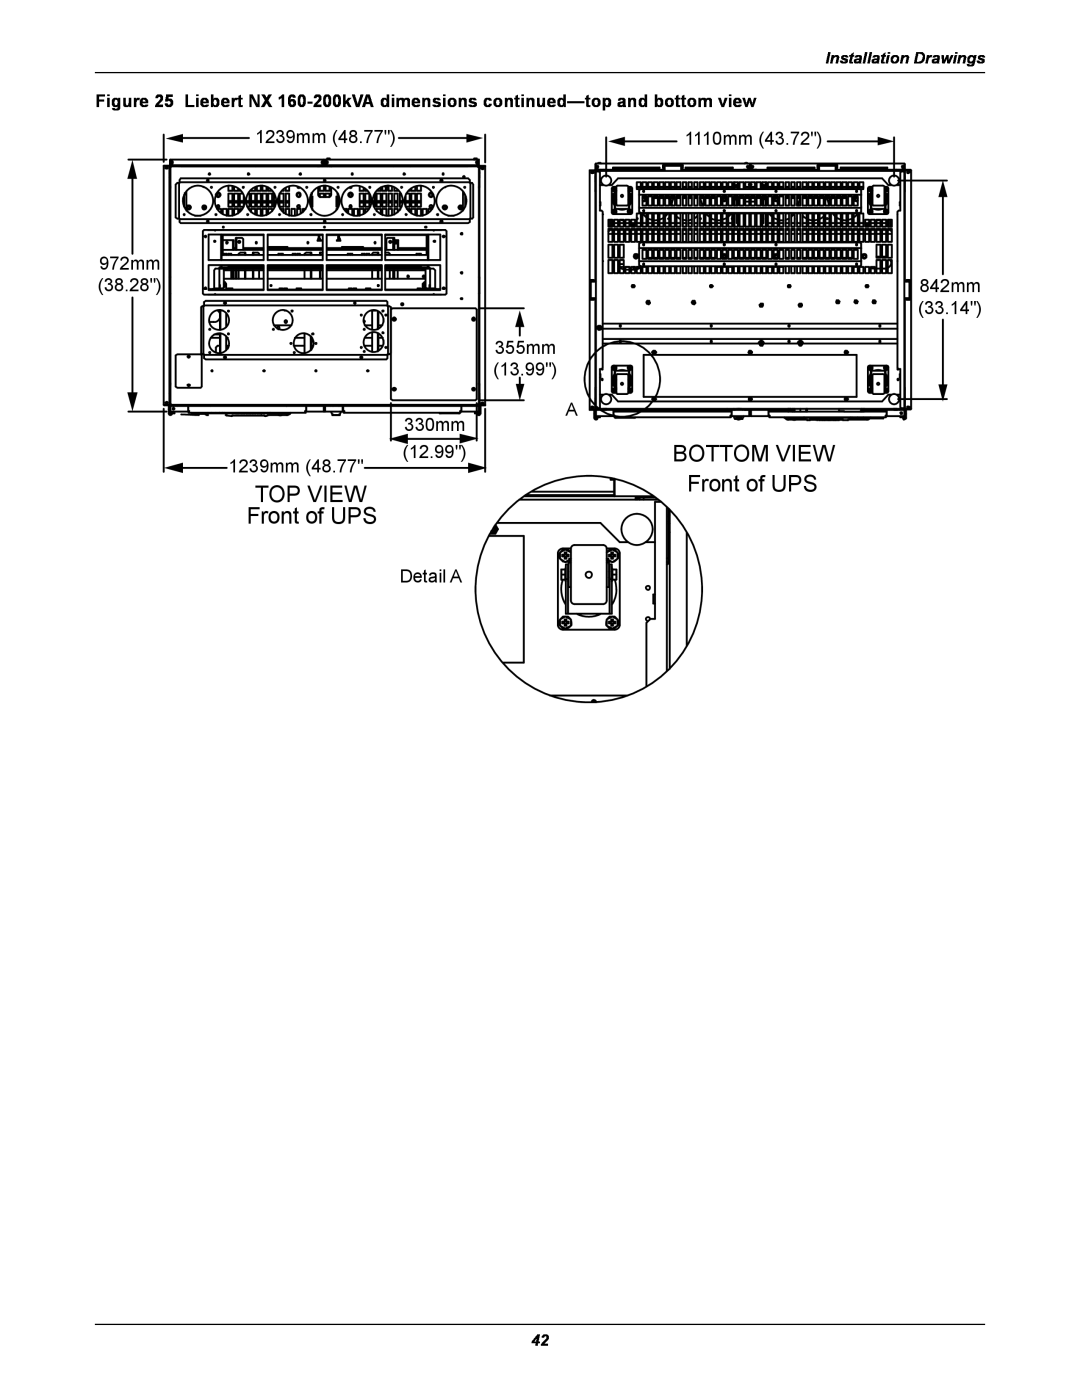 Emerson 60HZ, 480V user manual TOP VIEW Front of UPS, BOTTOM VIEW Front of UPS 